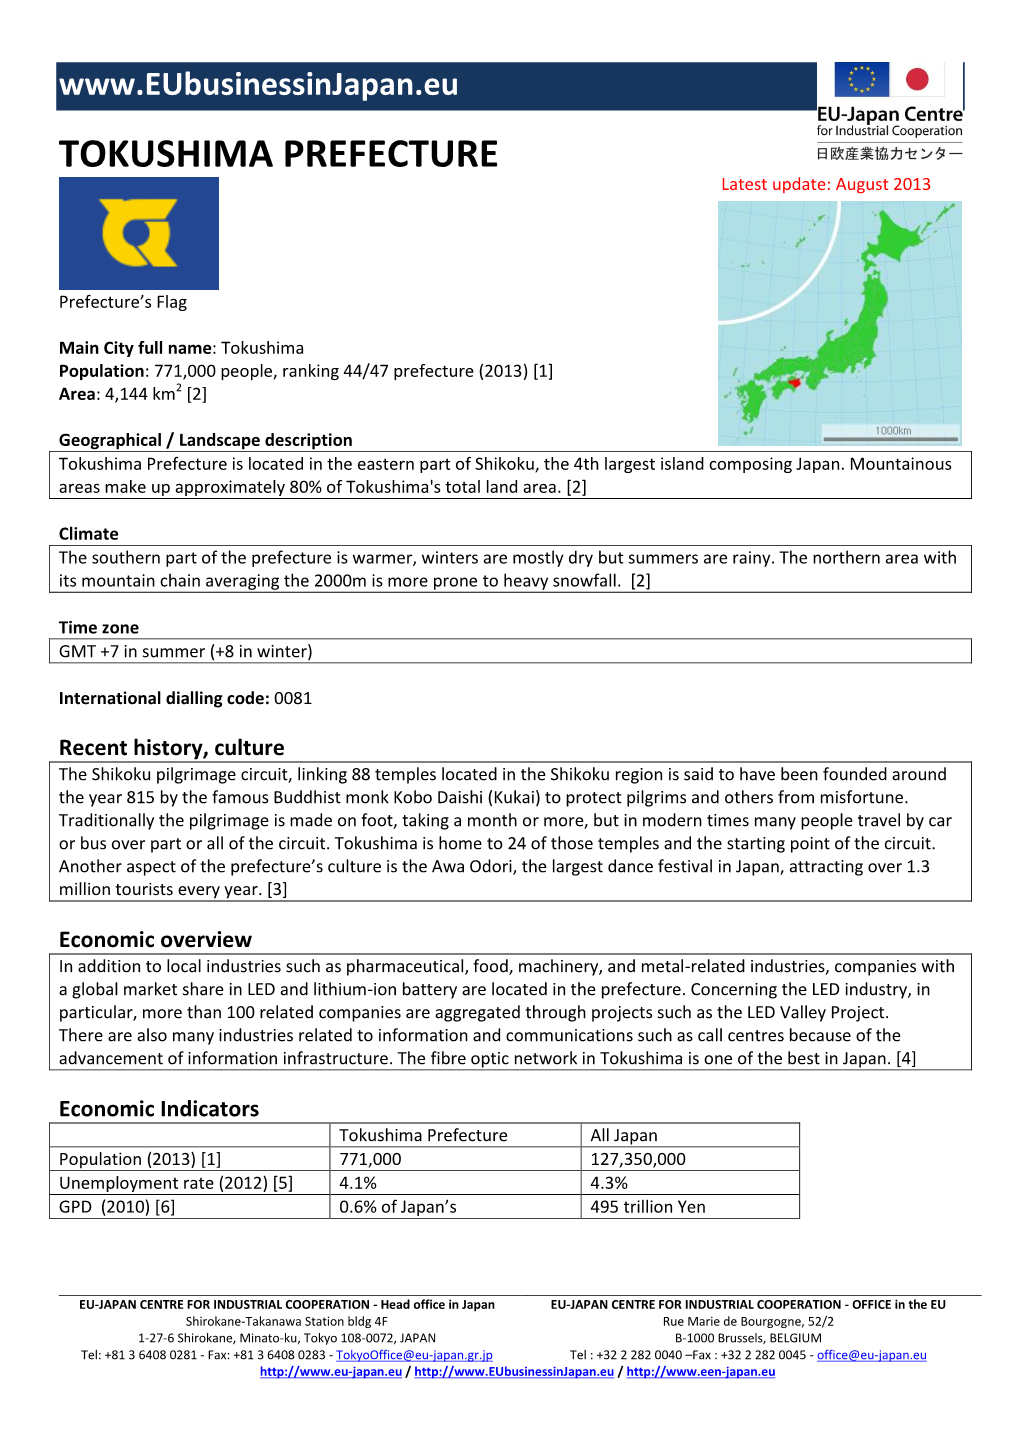 TOKUSHIMA PREFECTURE Latest Update: August 2013